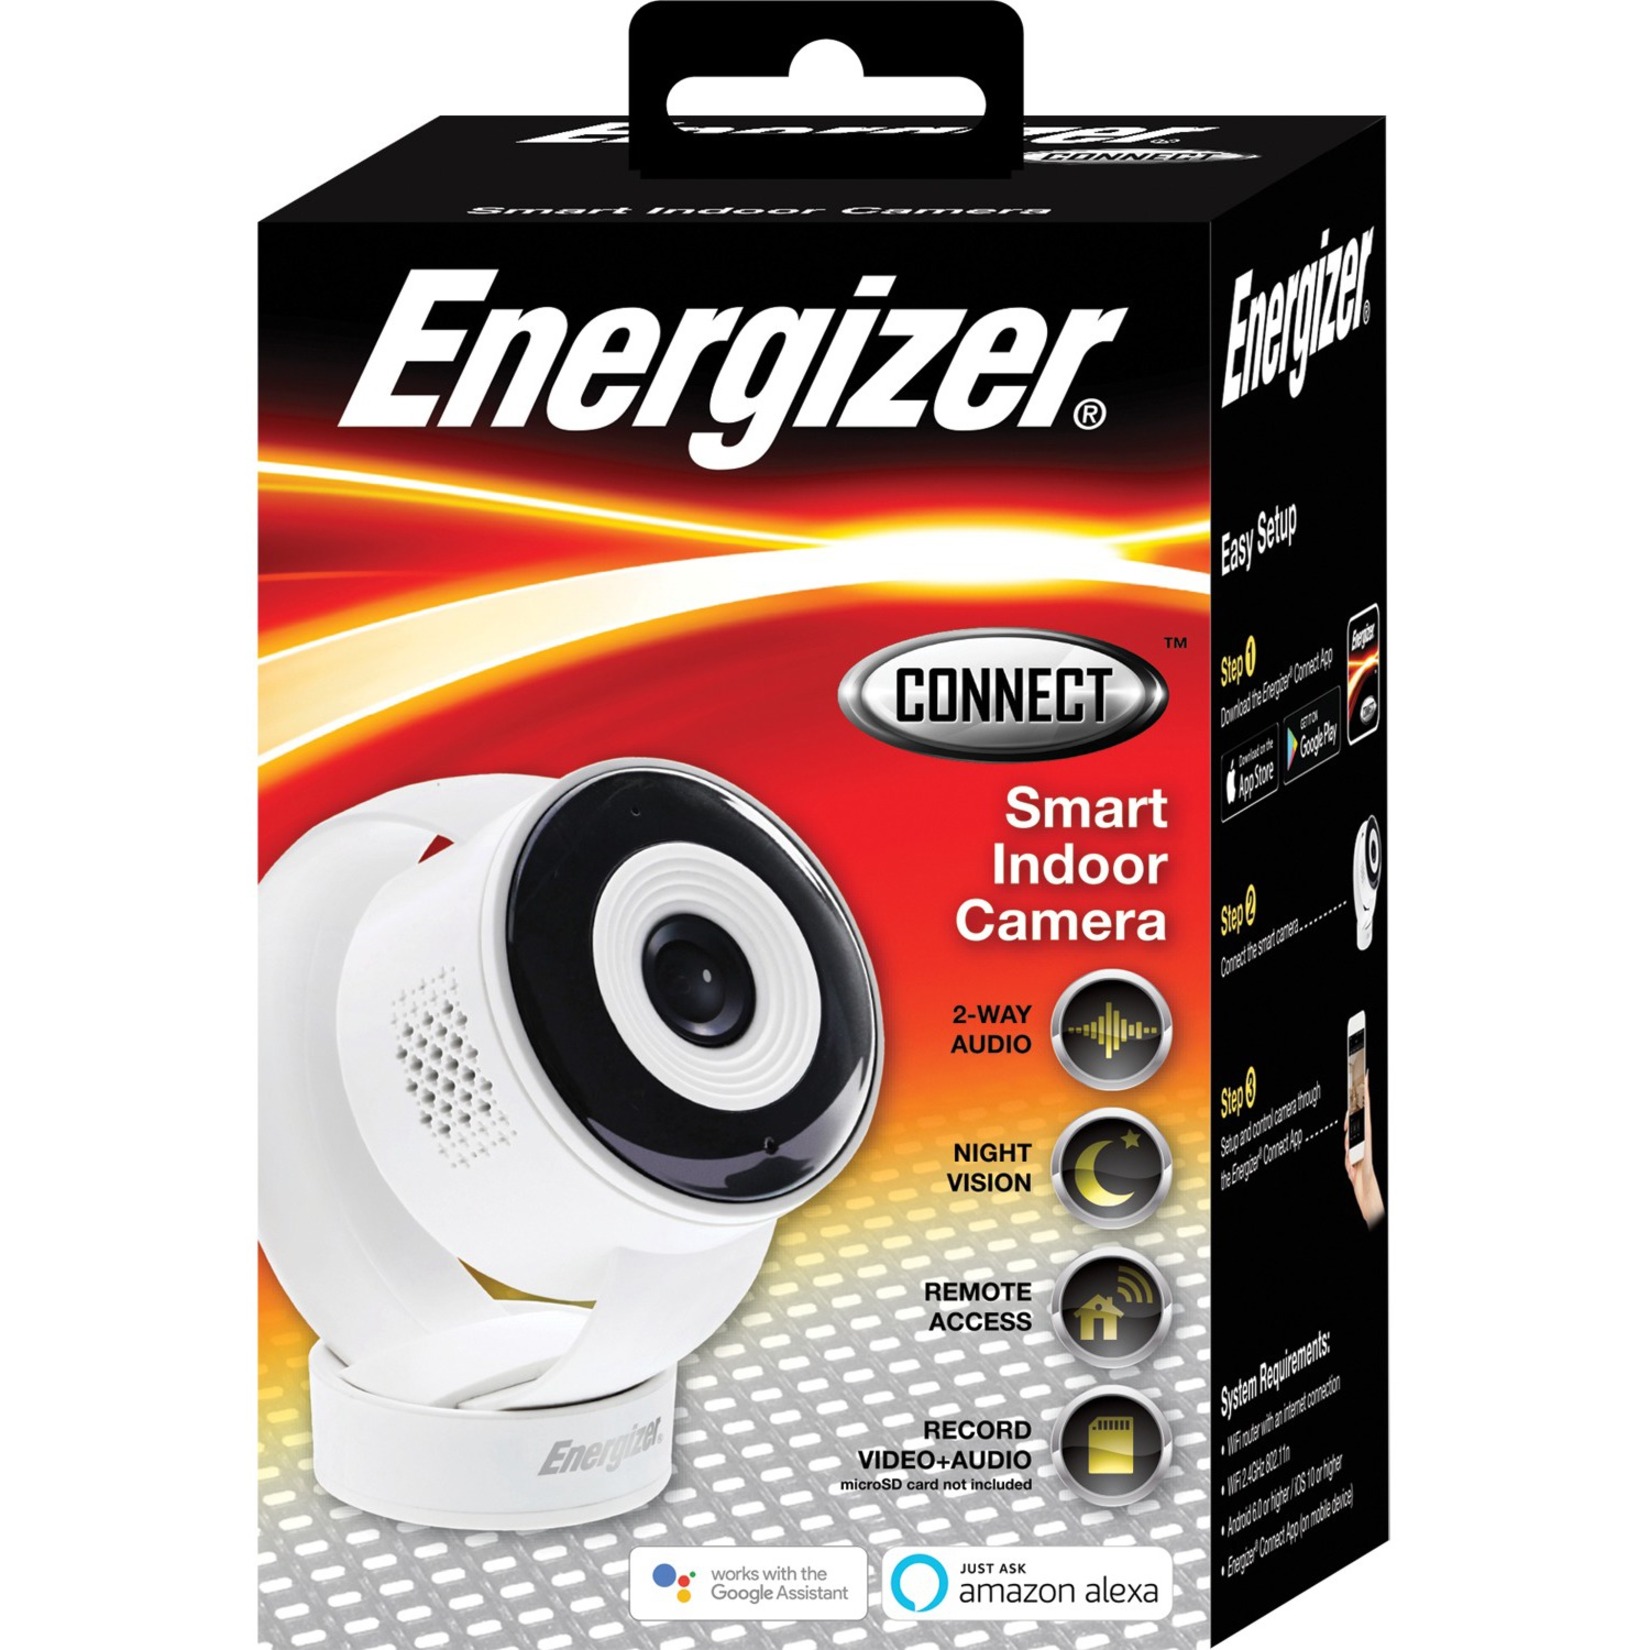 Energizer Smart Wi-Fi 720p Indoor Camera, White, Two Way Audio, Night Vision, Remote Access - image 5 of 10